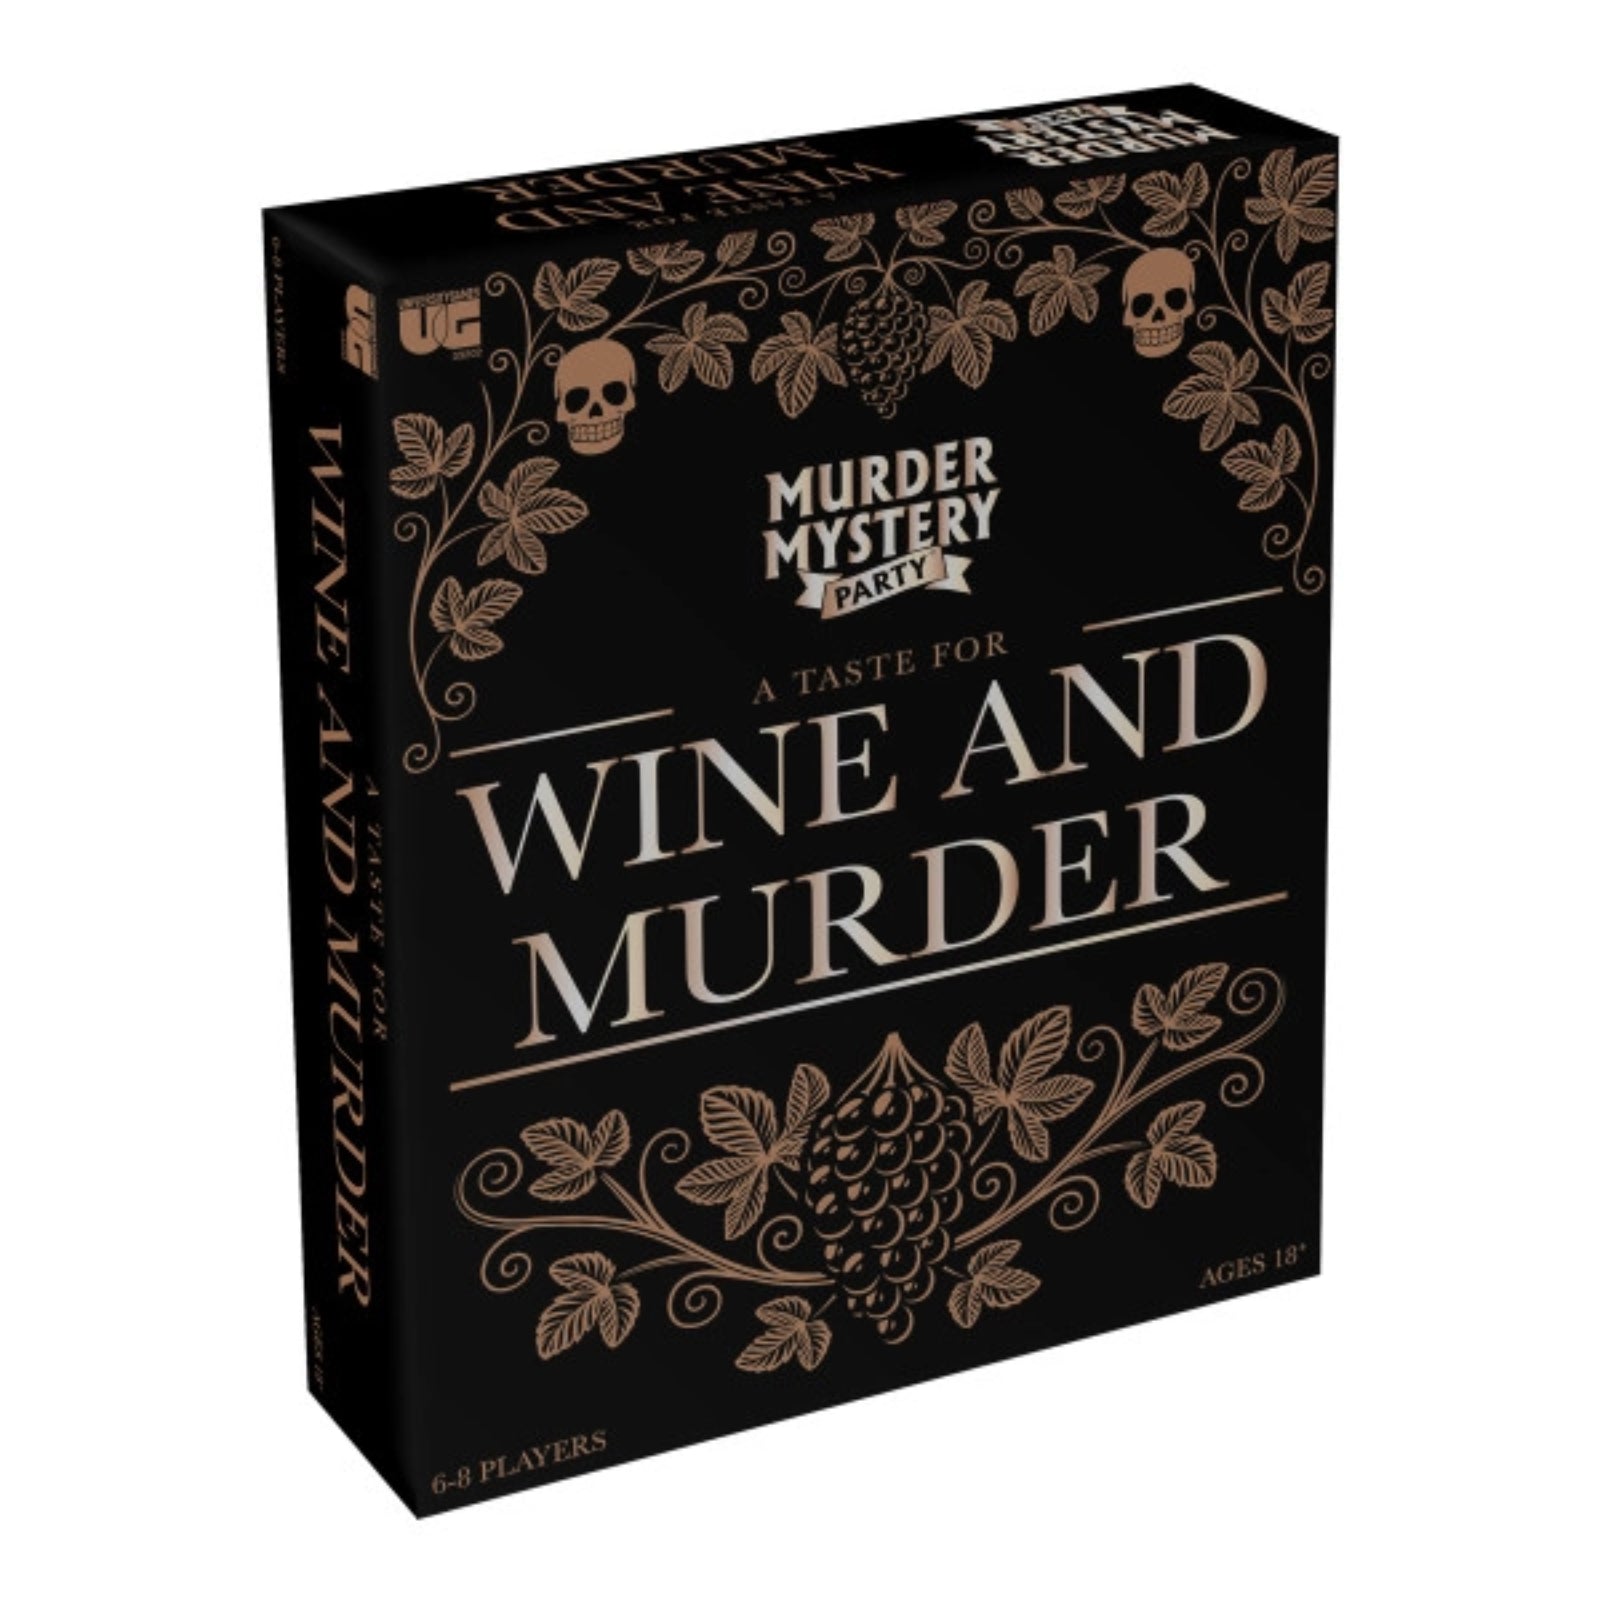 A Taste for Wine and Murder - Murder Mystery Party